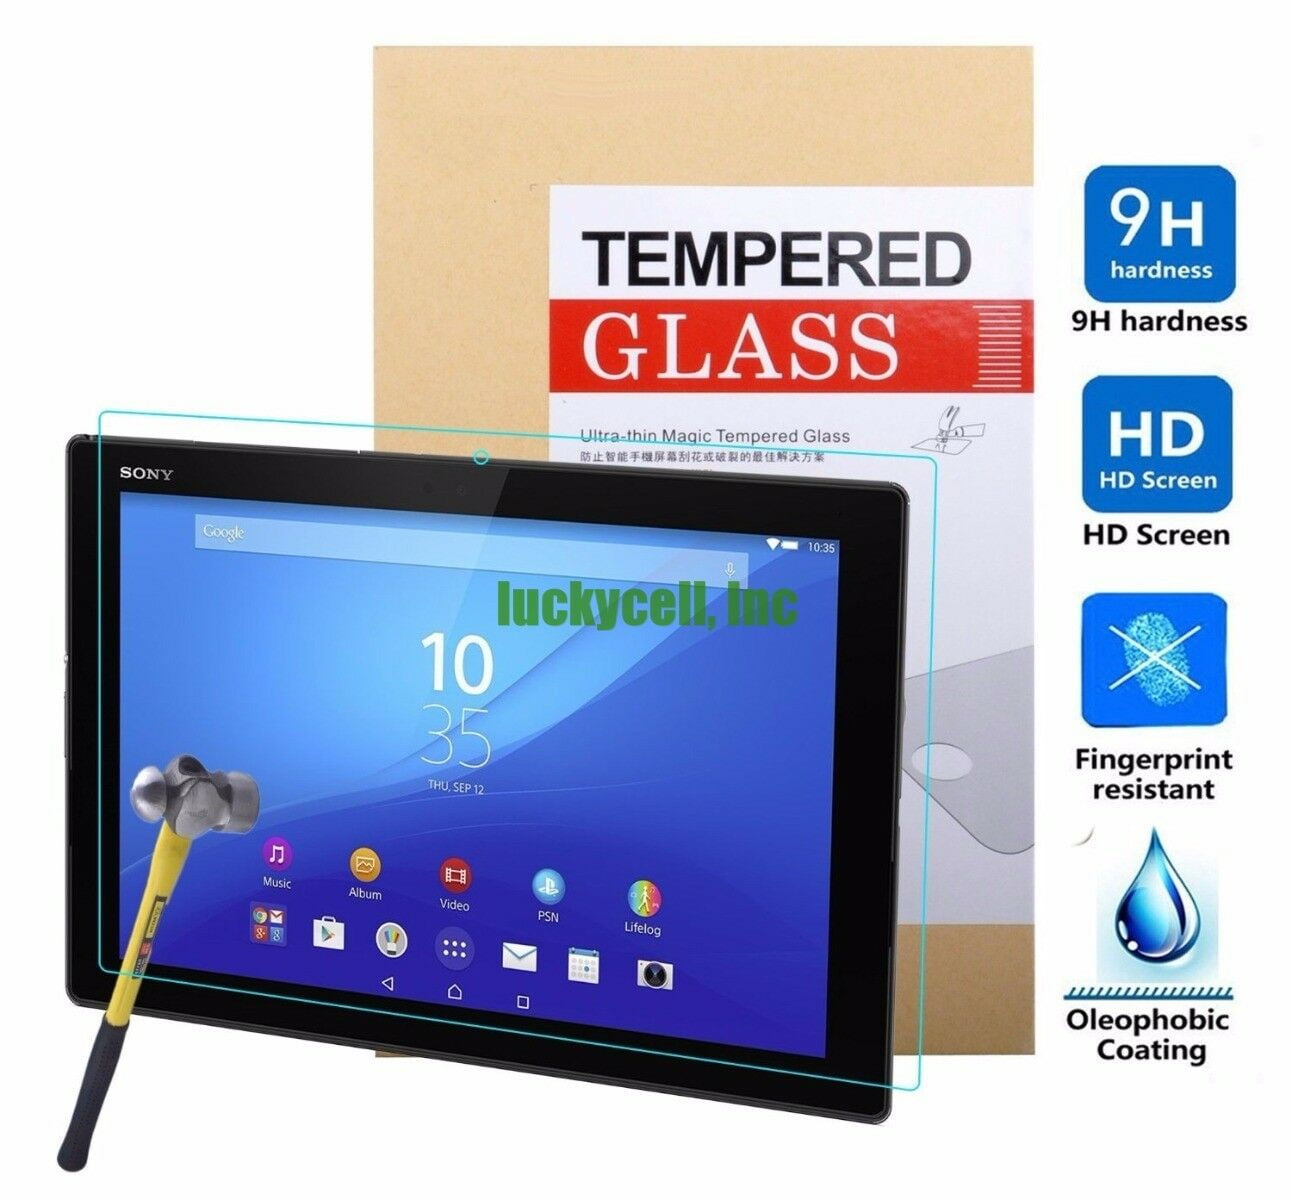 Sony Xperia Z4 Tablet Premium Hd Ultra Clear Tempered Glass Screen Protector Walmart Com